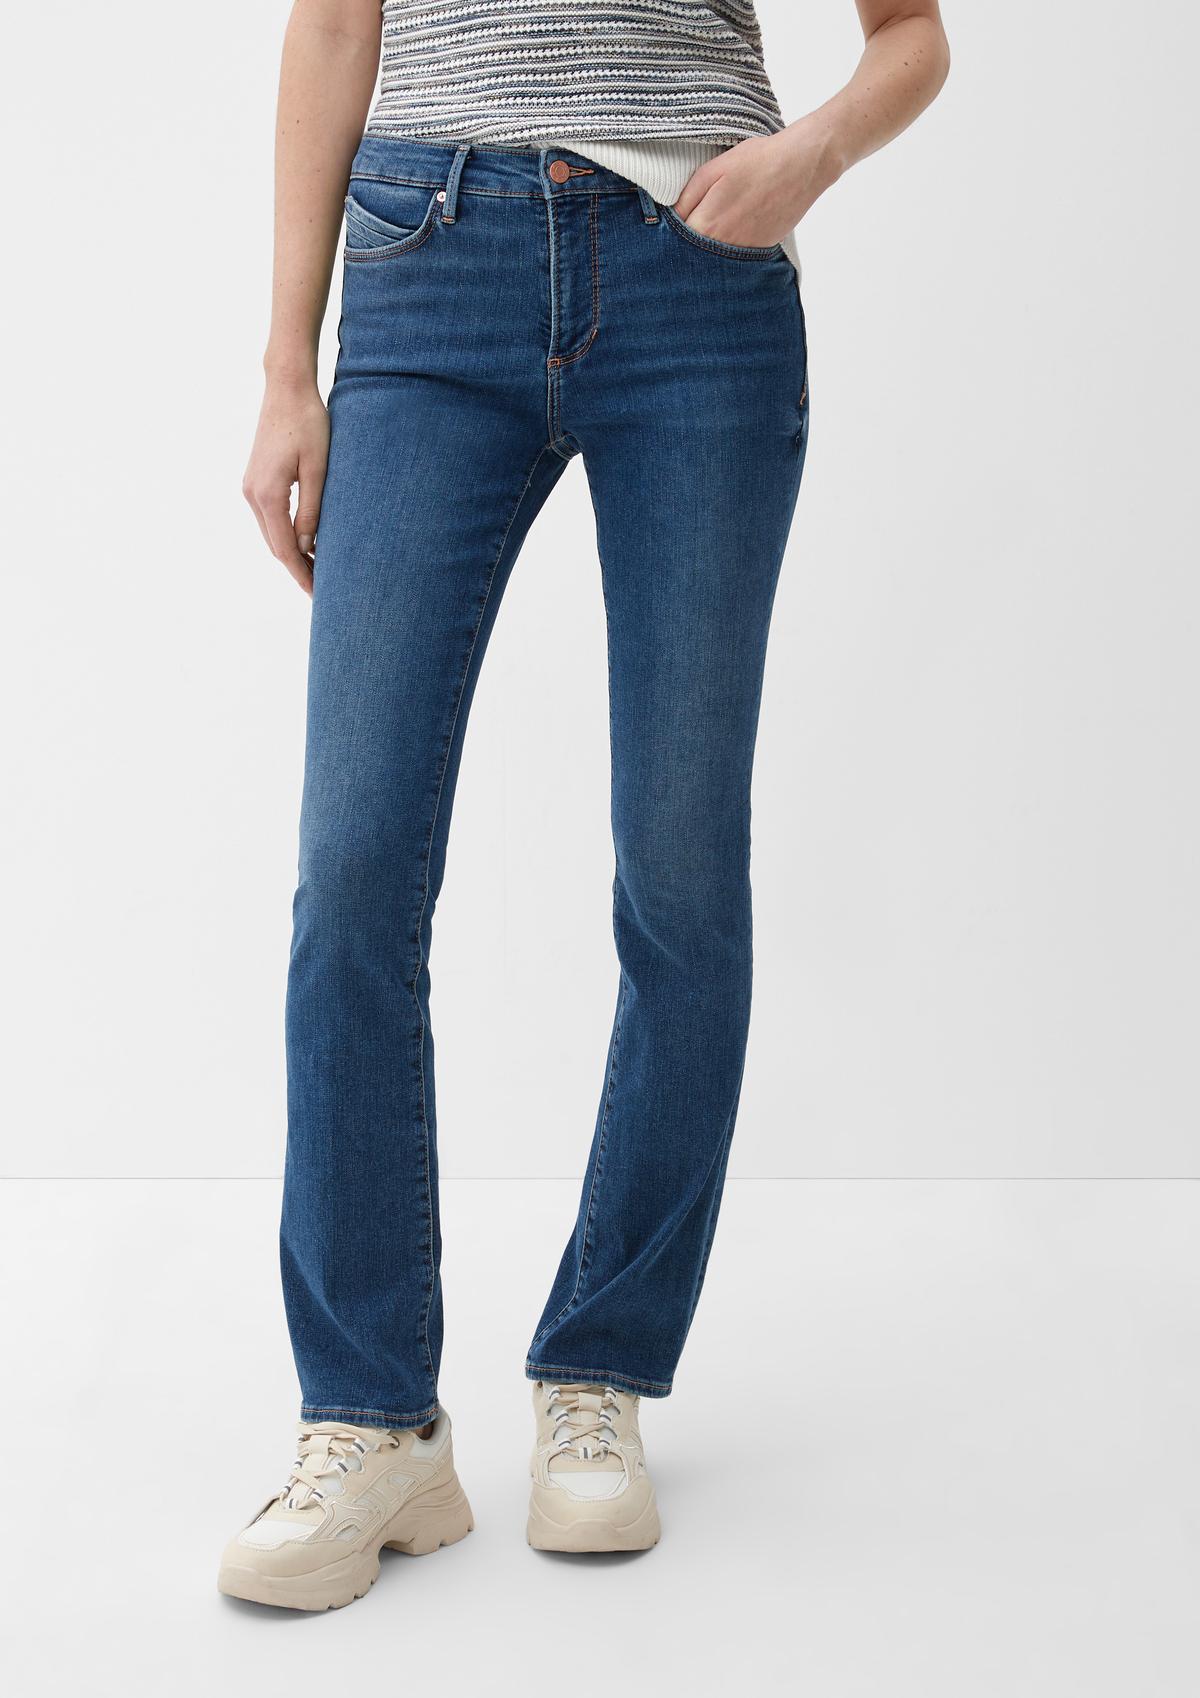 Jeans Beverly / Slim Fit / Mid Rise / Bootcut Leg 